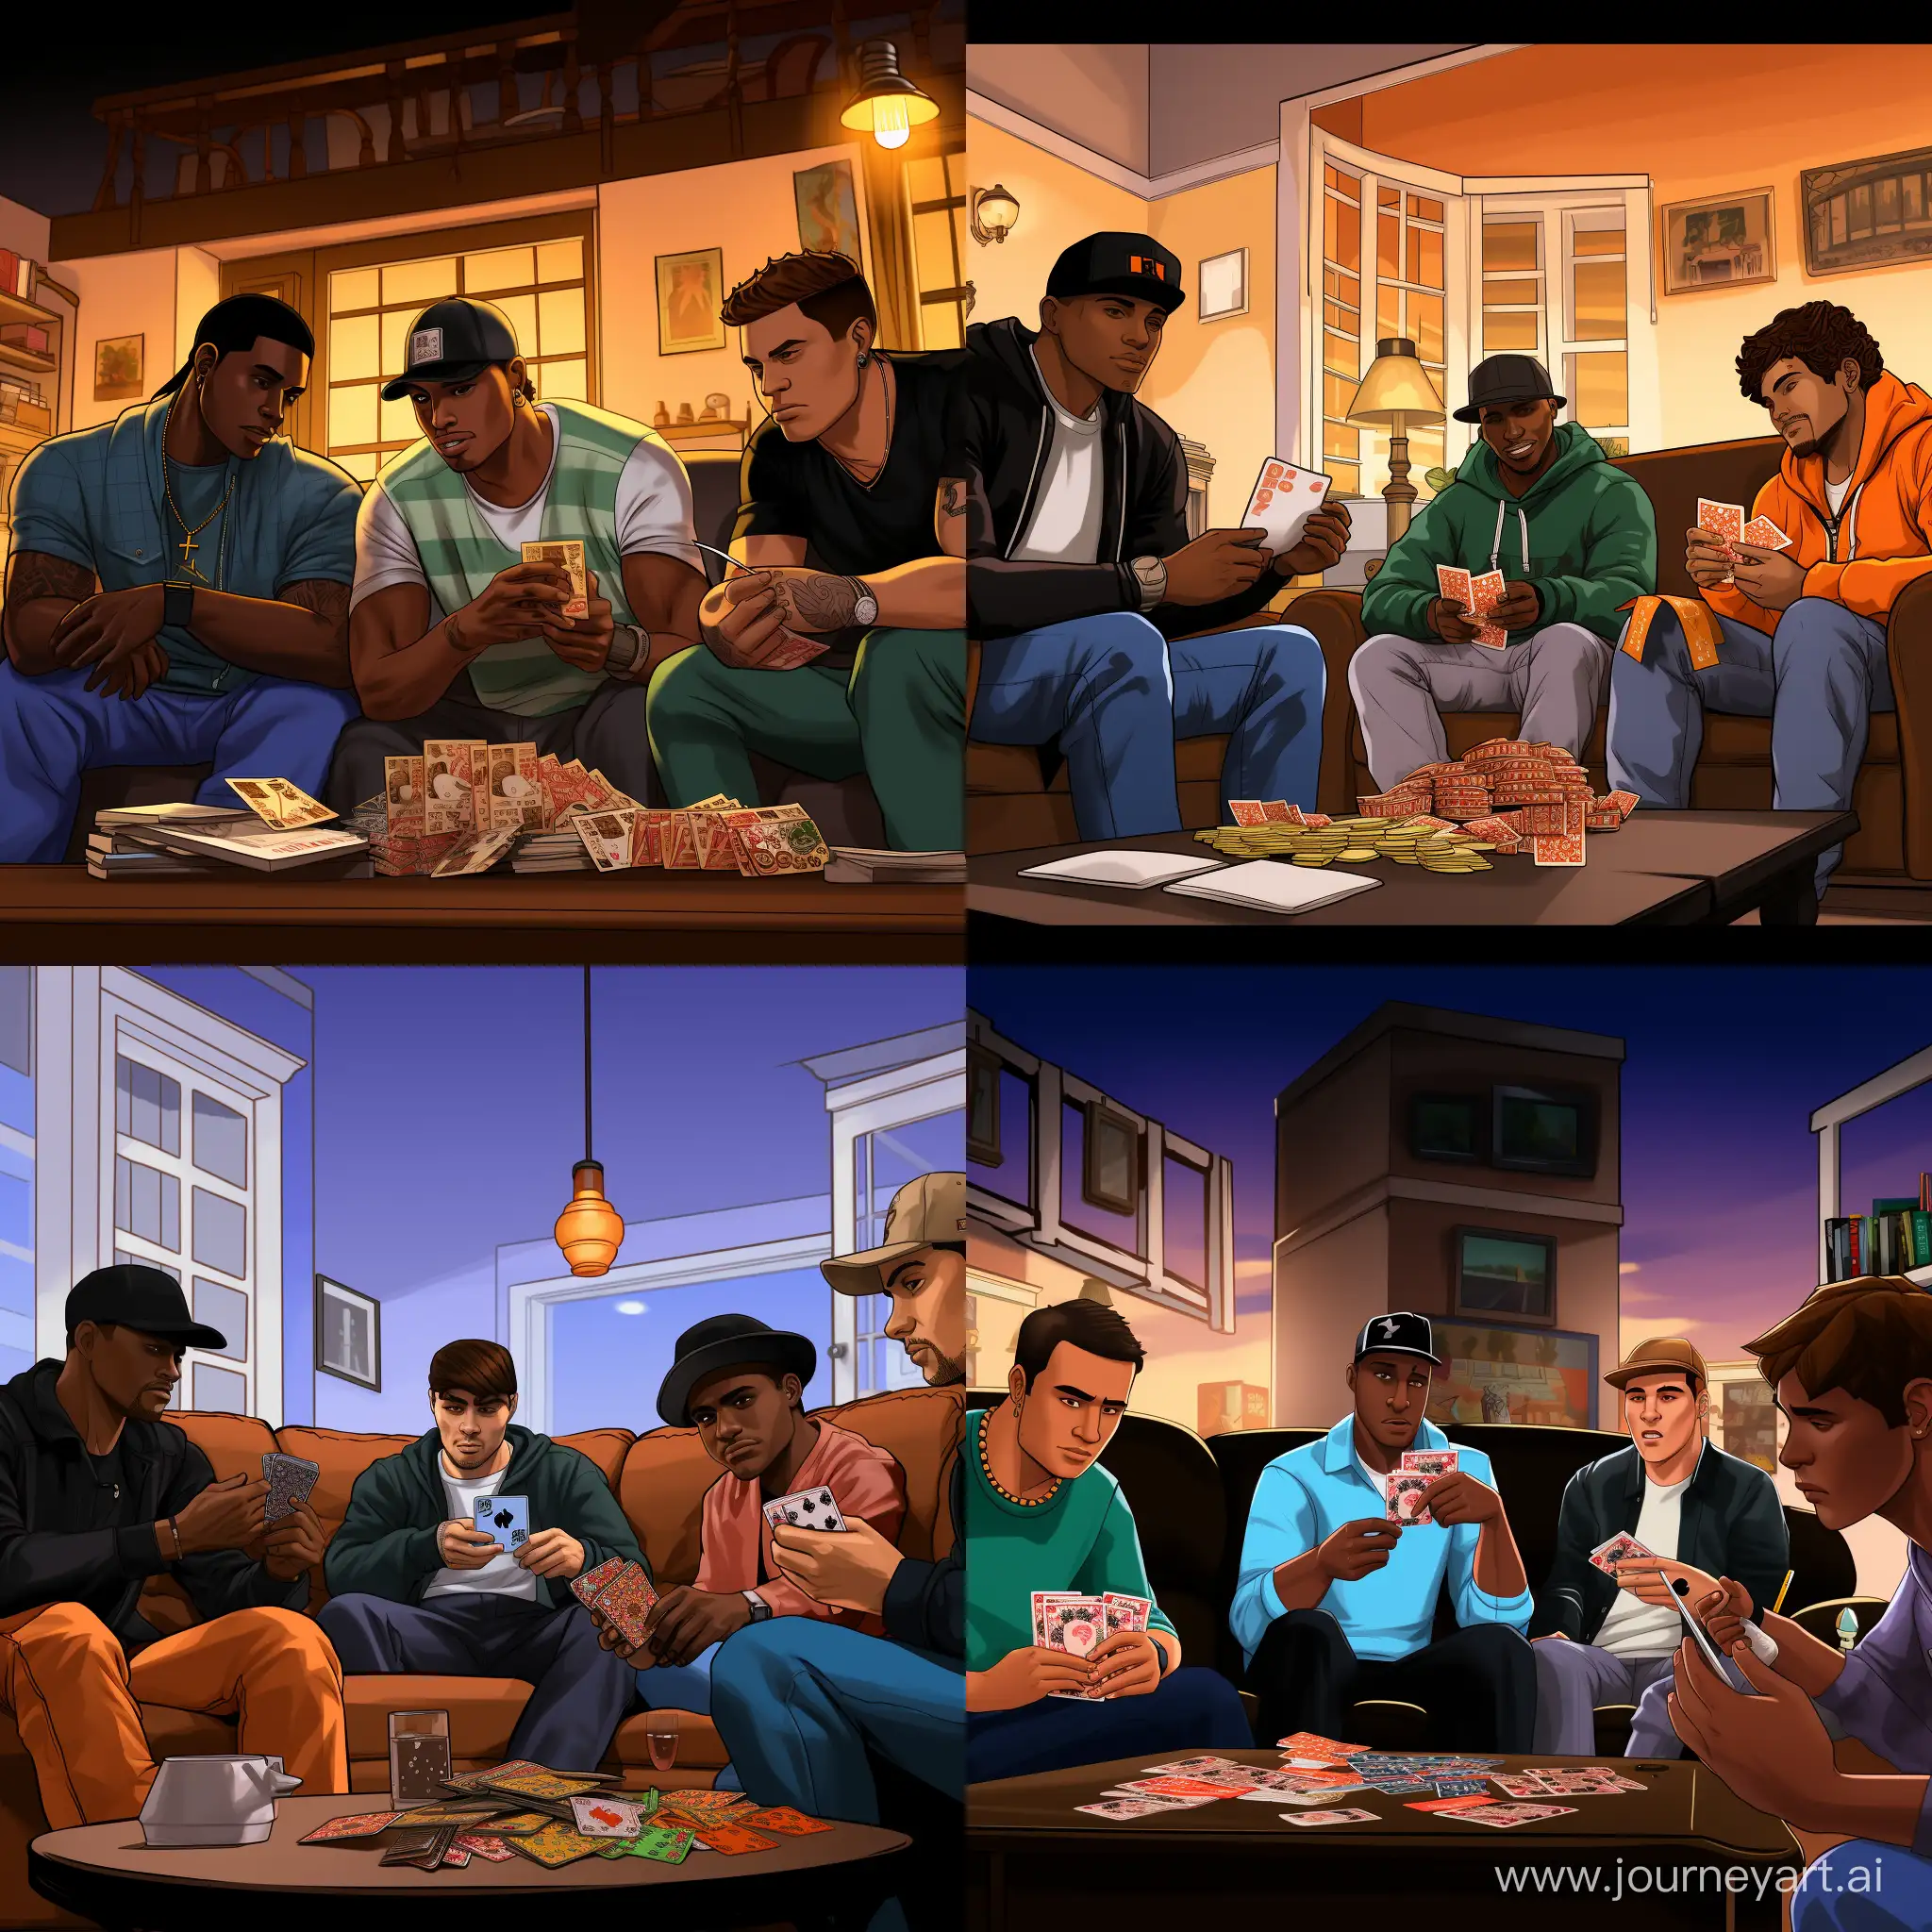 Four white men from the hood are spending their evening together in a luxury living room. They are seated on a king-size sofa around a coffee table that holds money, drugs, and drinks. A large Rottweiler is resting nearby in its dog basket.

On the right side of the sofa, one of the men is fully engrossed in a gaming session, holding a wired controller in his hands and staring into the big flat-screen TV. His focus is fixated on the high-definition display of a Playstation 5. With a controller in hand, he skillfully navigates the virtual world, immersing himself in the action and adventure.

In the corner of the couch, another man relaxes while indulging in a smoke from a bong. A wisp of smoke swirls around him, creating a tranquil atmosphere as he savors the moment.

 

The third man lies on the sofa, shifting occasionally in his sleep, while the fourth man extends a hand to stroke the Rottweiler's soft fur, ever mindful of its presence. With gentle movements, he enjoys the companionship and loyalty of the canine, finding solace in the simple act of petting.

In this realistic scene, the four men form a bond through shared experiences and a sense of tranquility in each other's company.